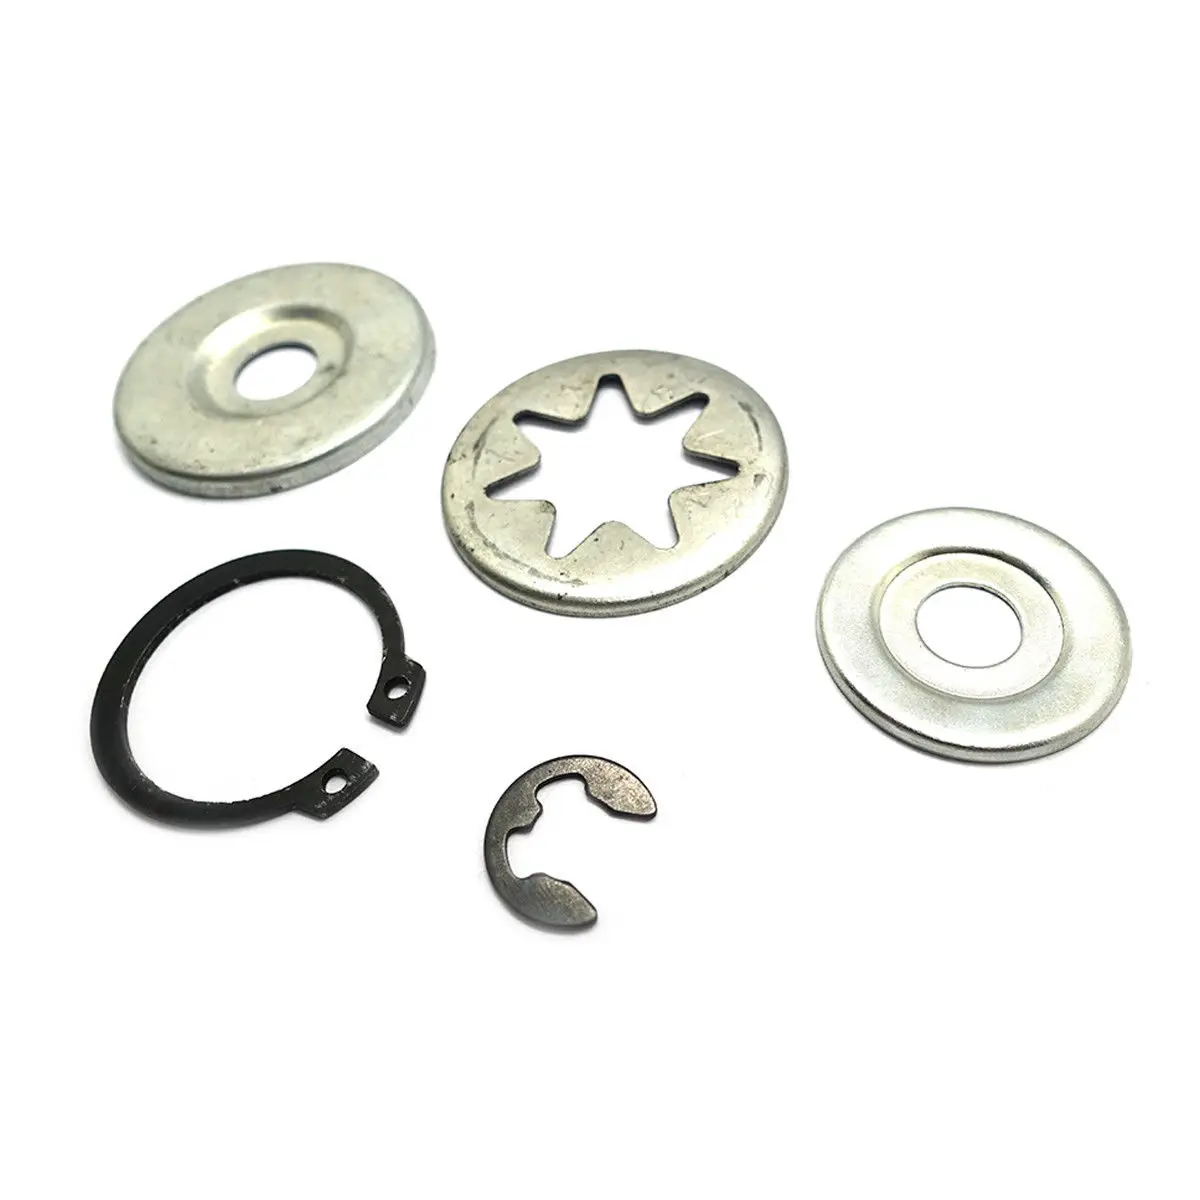 MS381 Clutch Sprocket Washers 380 Parts #11191628915 For Stihl Durable Replace Replacement